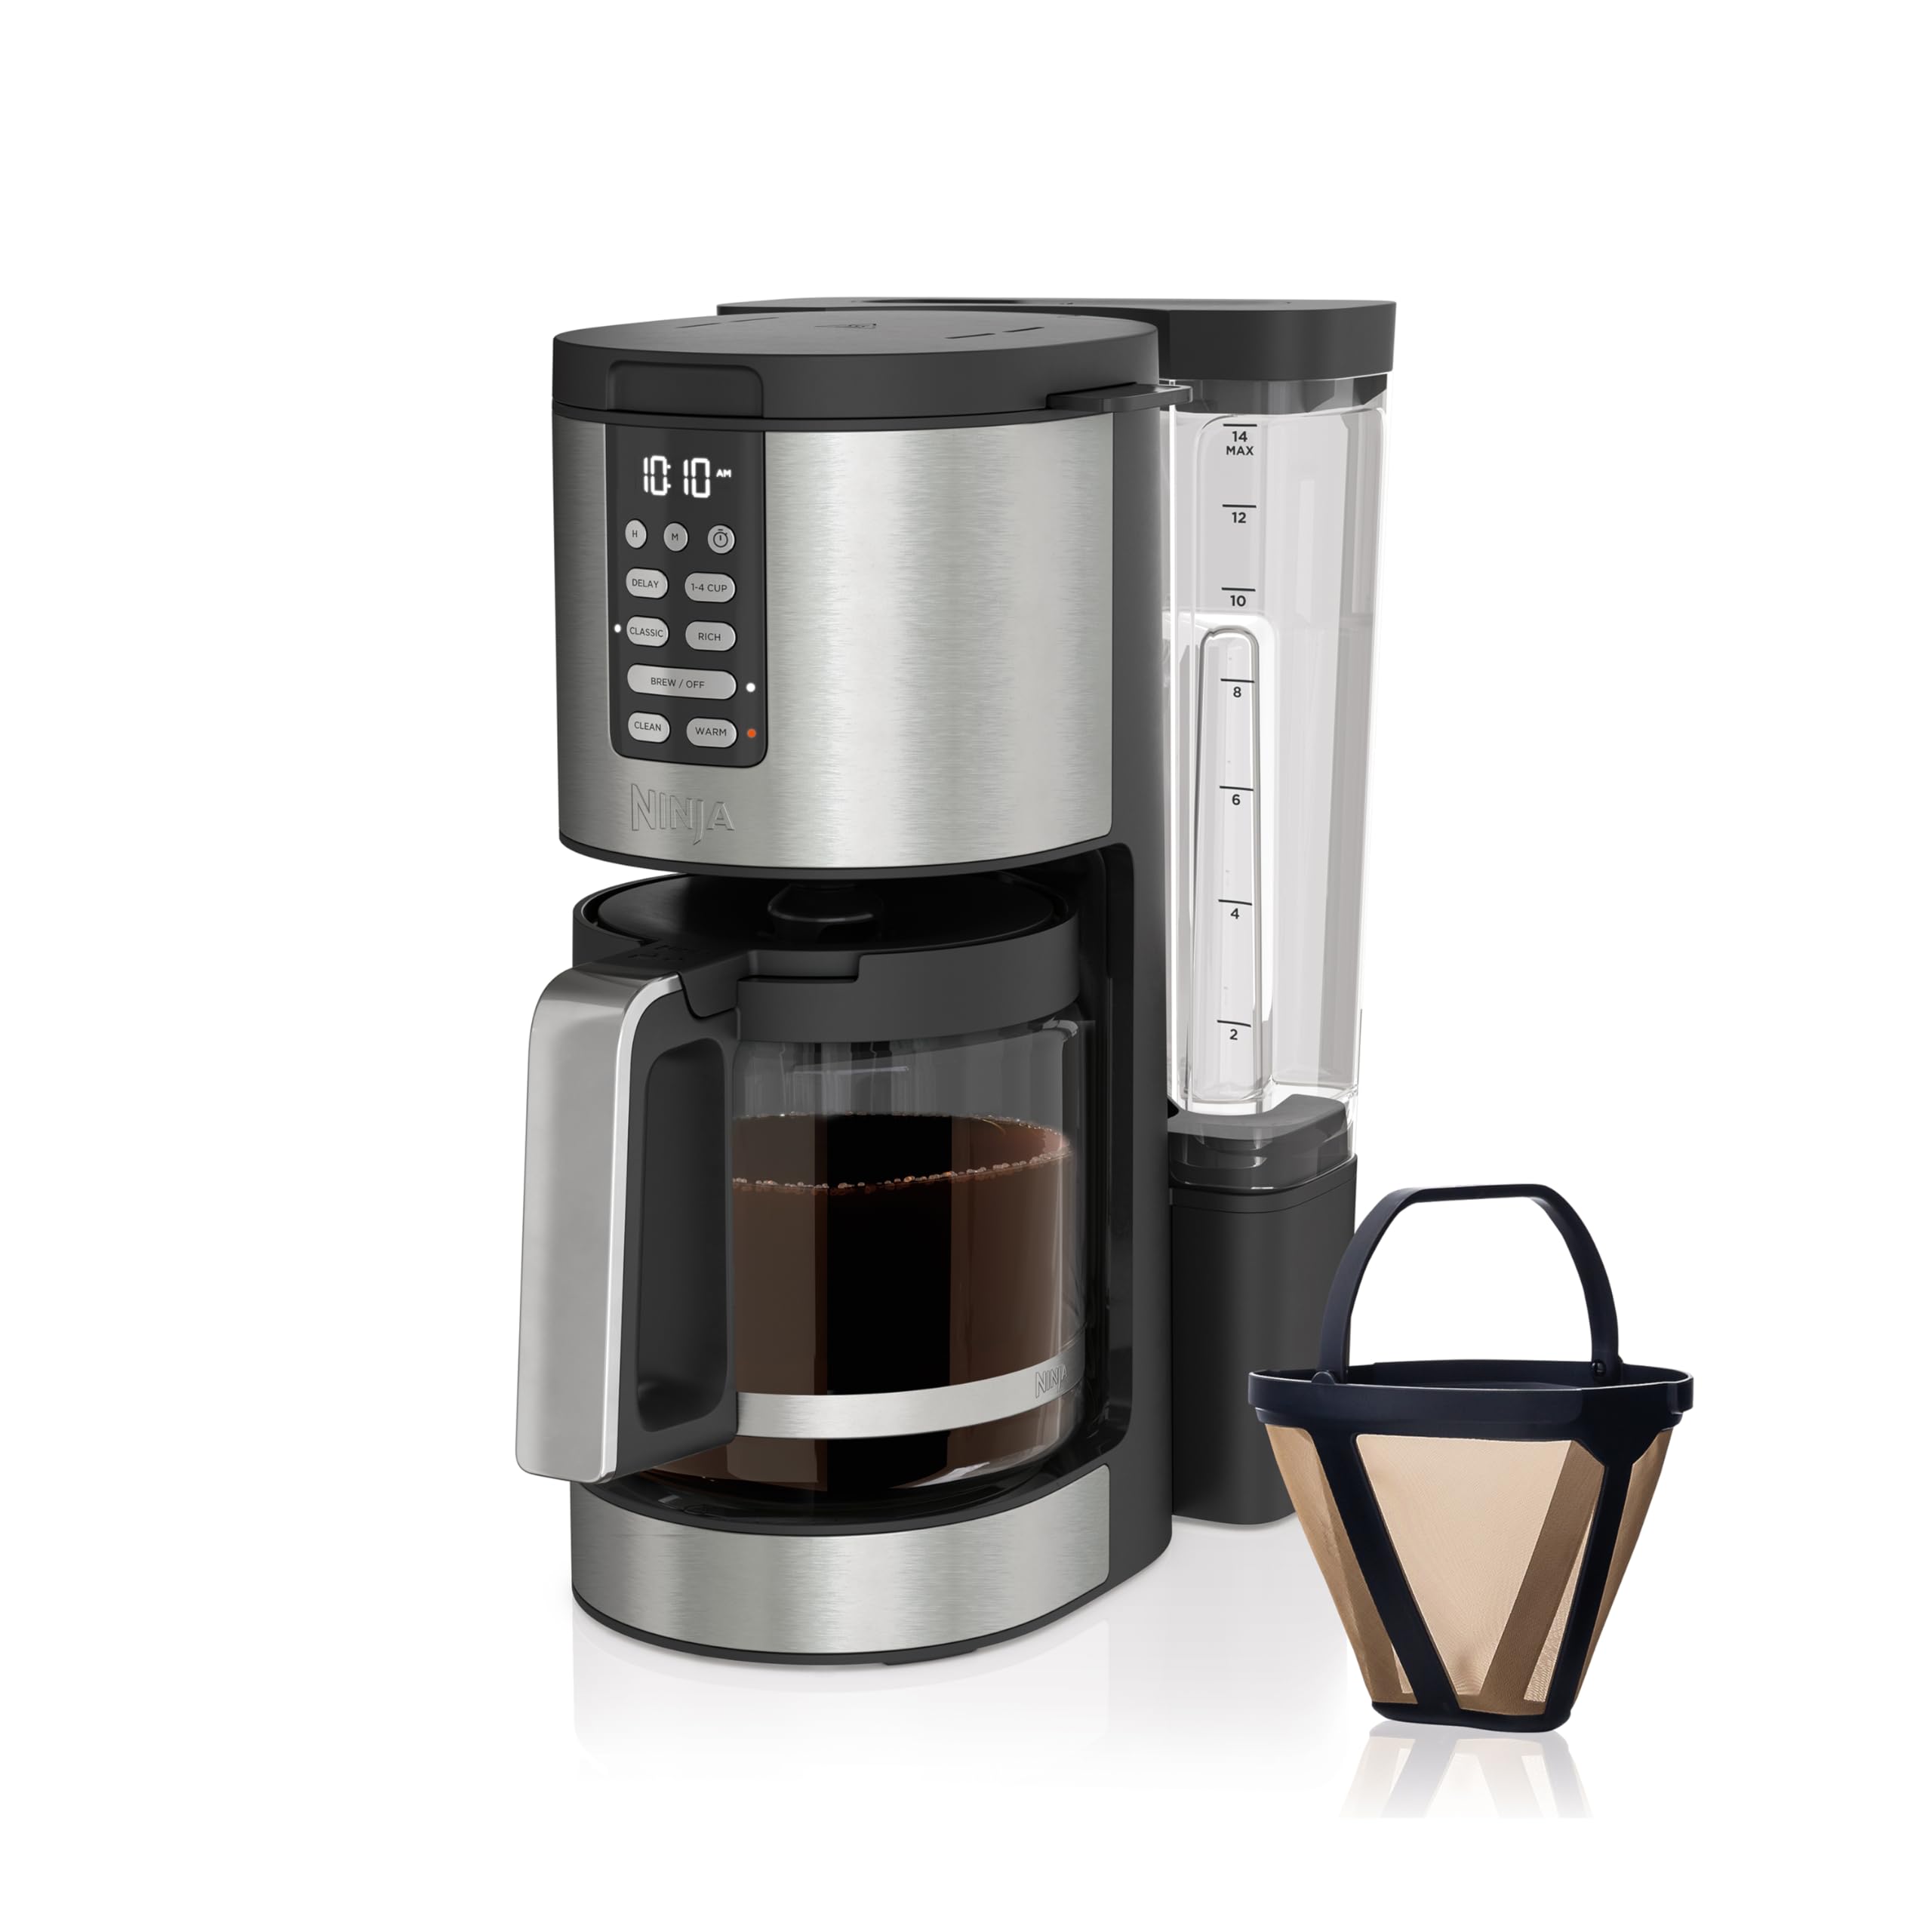 Ninja DCM201 14 Cup , Programmable Coffee Maker XL Pro with Permanent Filter, 2 Brew Styles Classic & Rich, 4 Programs Small Batch, Delay Brew, Freshness Timer & Keep Warm, Stainless Steel 14-Cup Carafe Stainless Steel